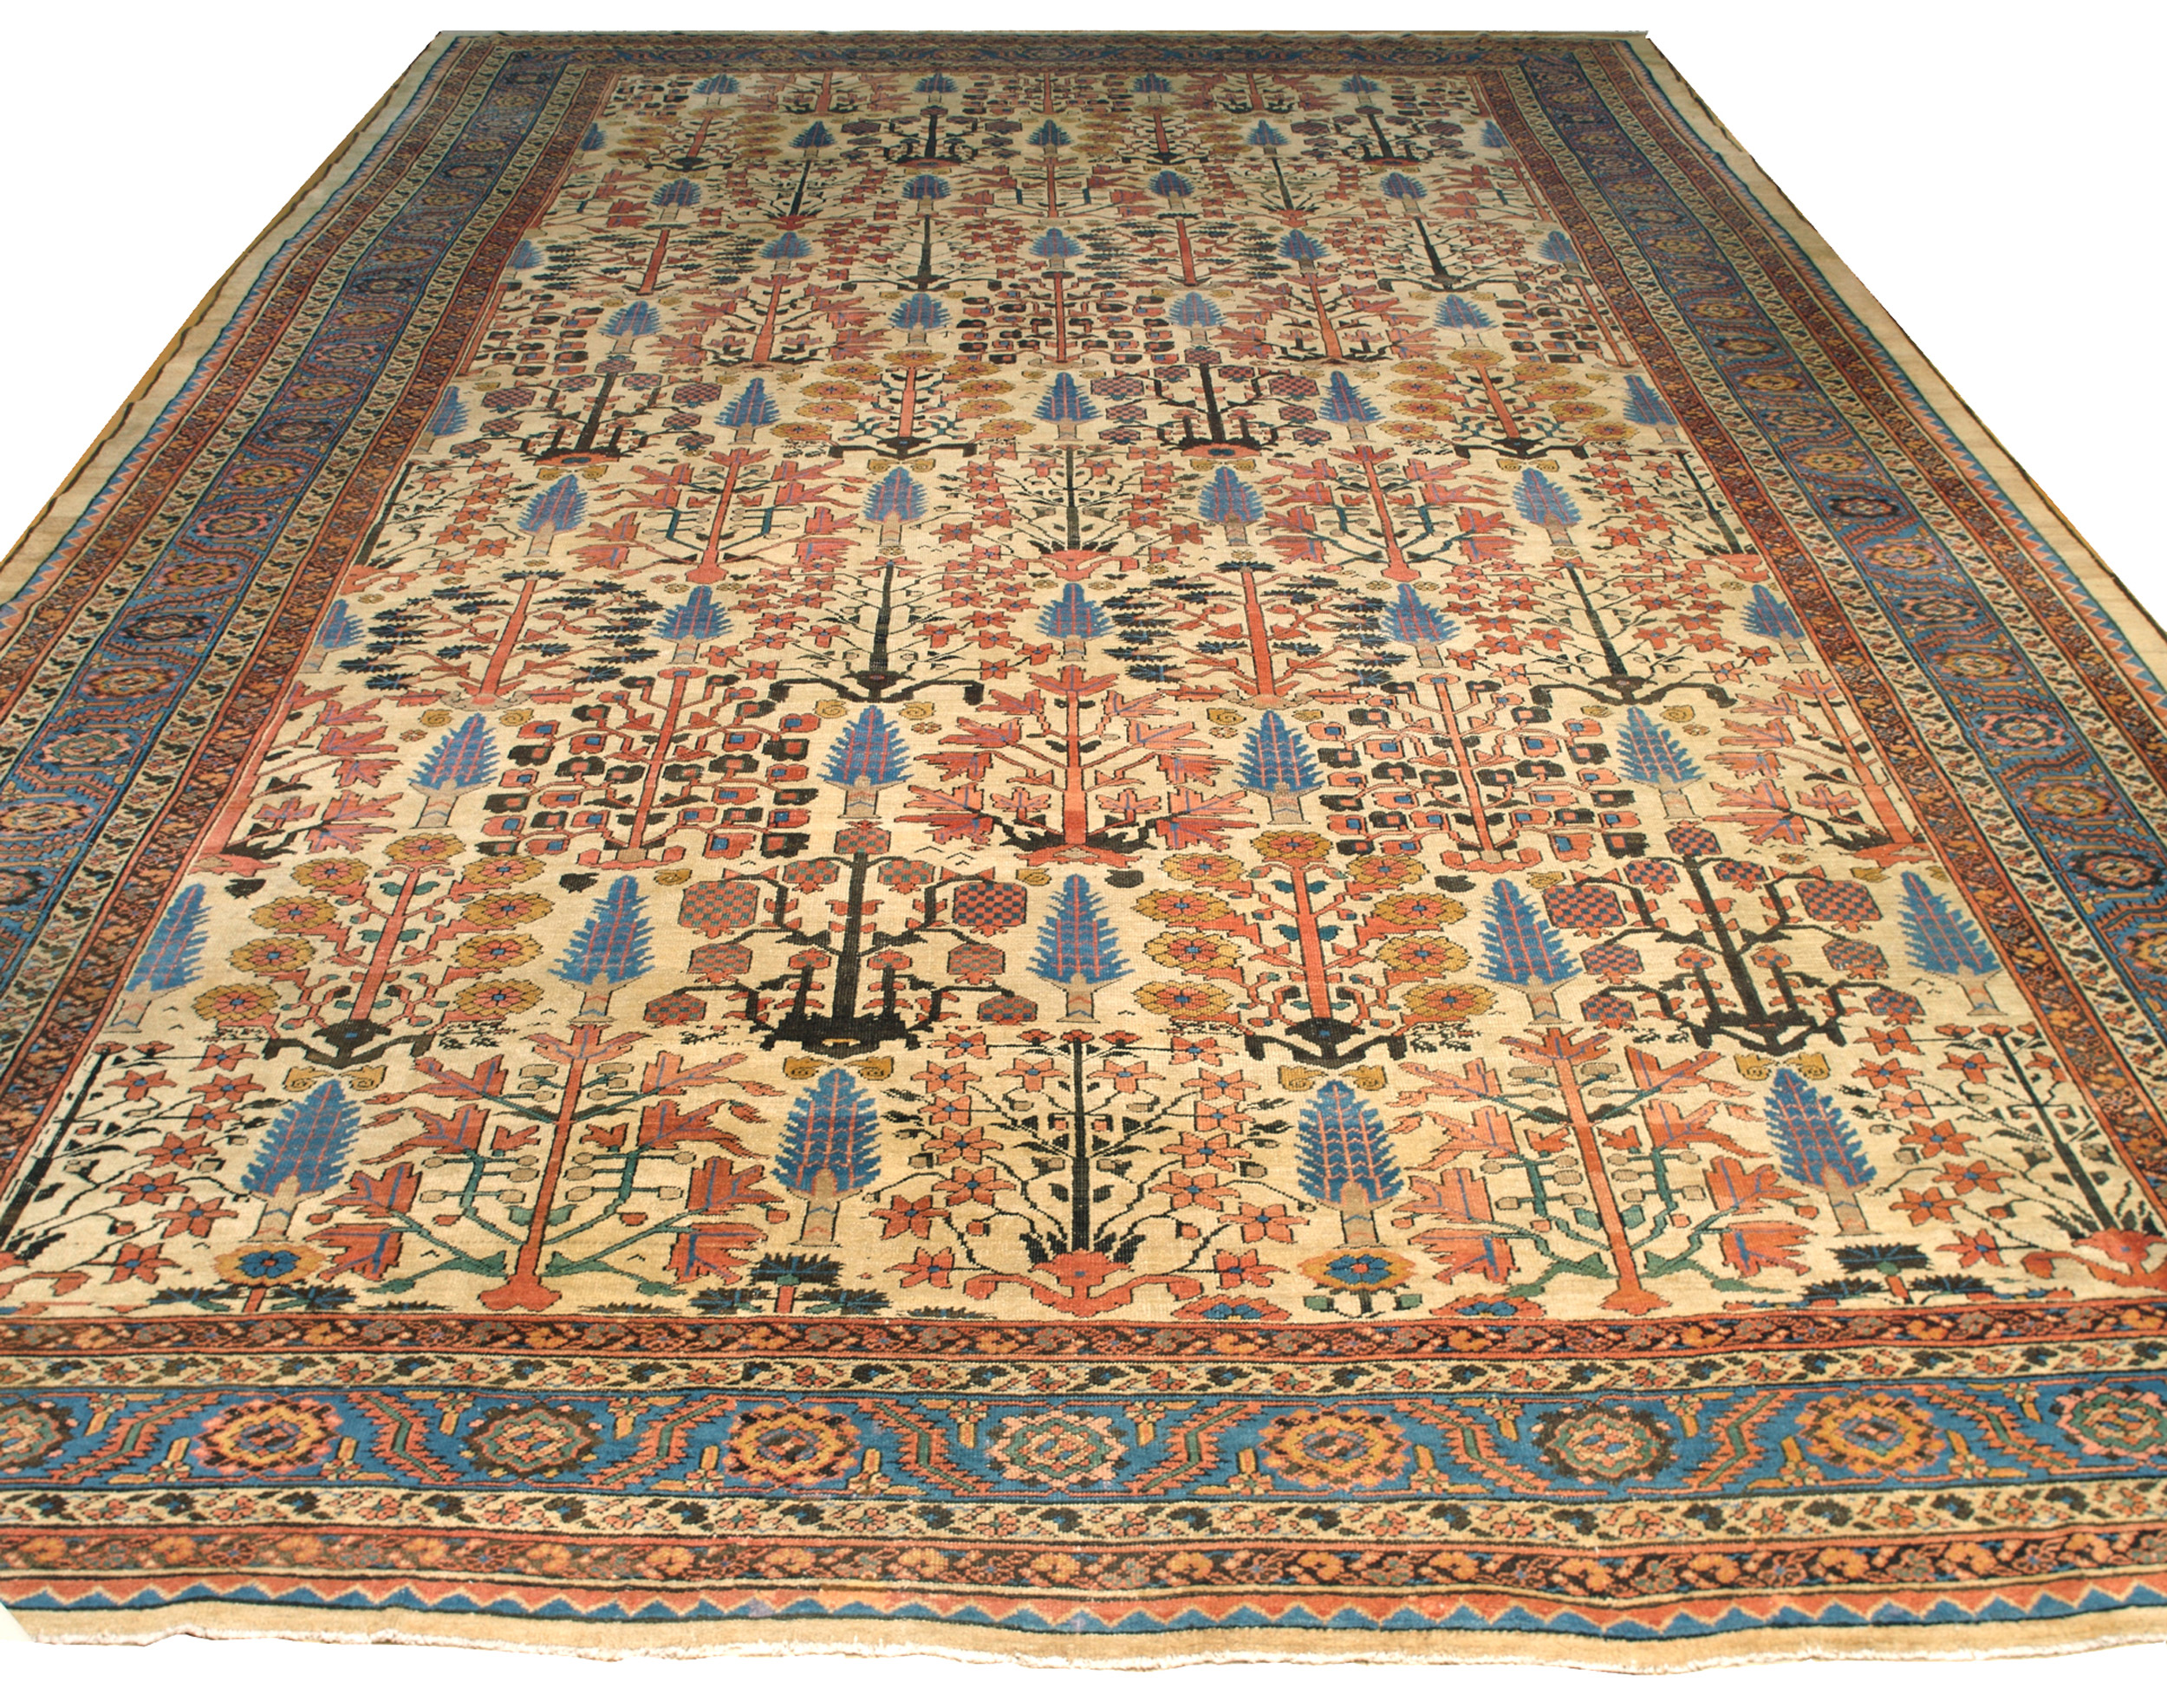 An antique Persian Bakshaish carpet of large size at approximately 13'5" x 18'7". The ivory field is decorated with a Shrub and Flower design and framed by a deep sy blue border. Douglas Stock Gallery, antique Oriental rugs, Natick, Wellesley, Weston, Newton, Brookline, Boston,MA area - antique rugs South Natick,Ma